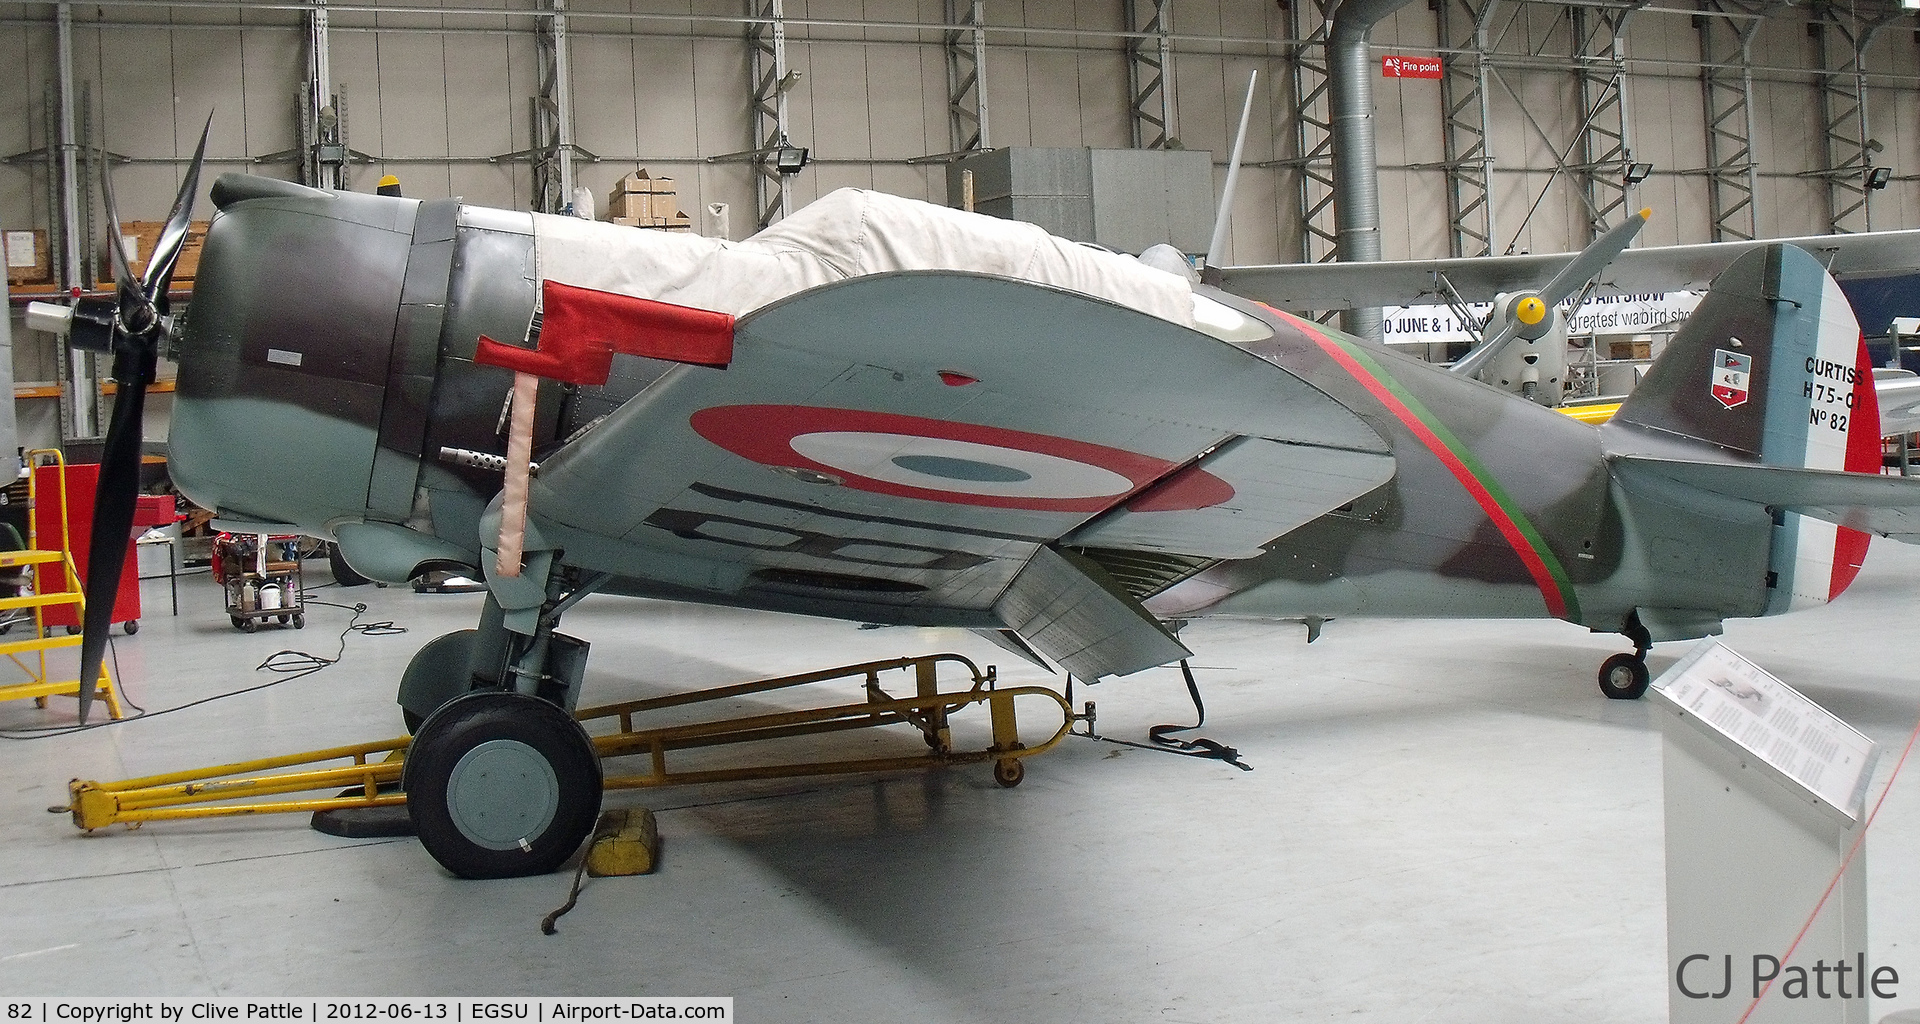 82, 1939 Curtiss H-75A-1 C/N 12881, G-CCVH - On display with 'The Fighter Collection' at IWM Duxford